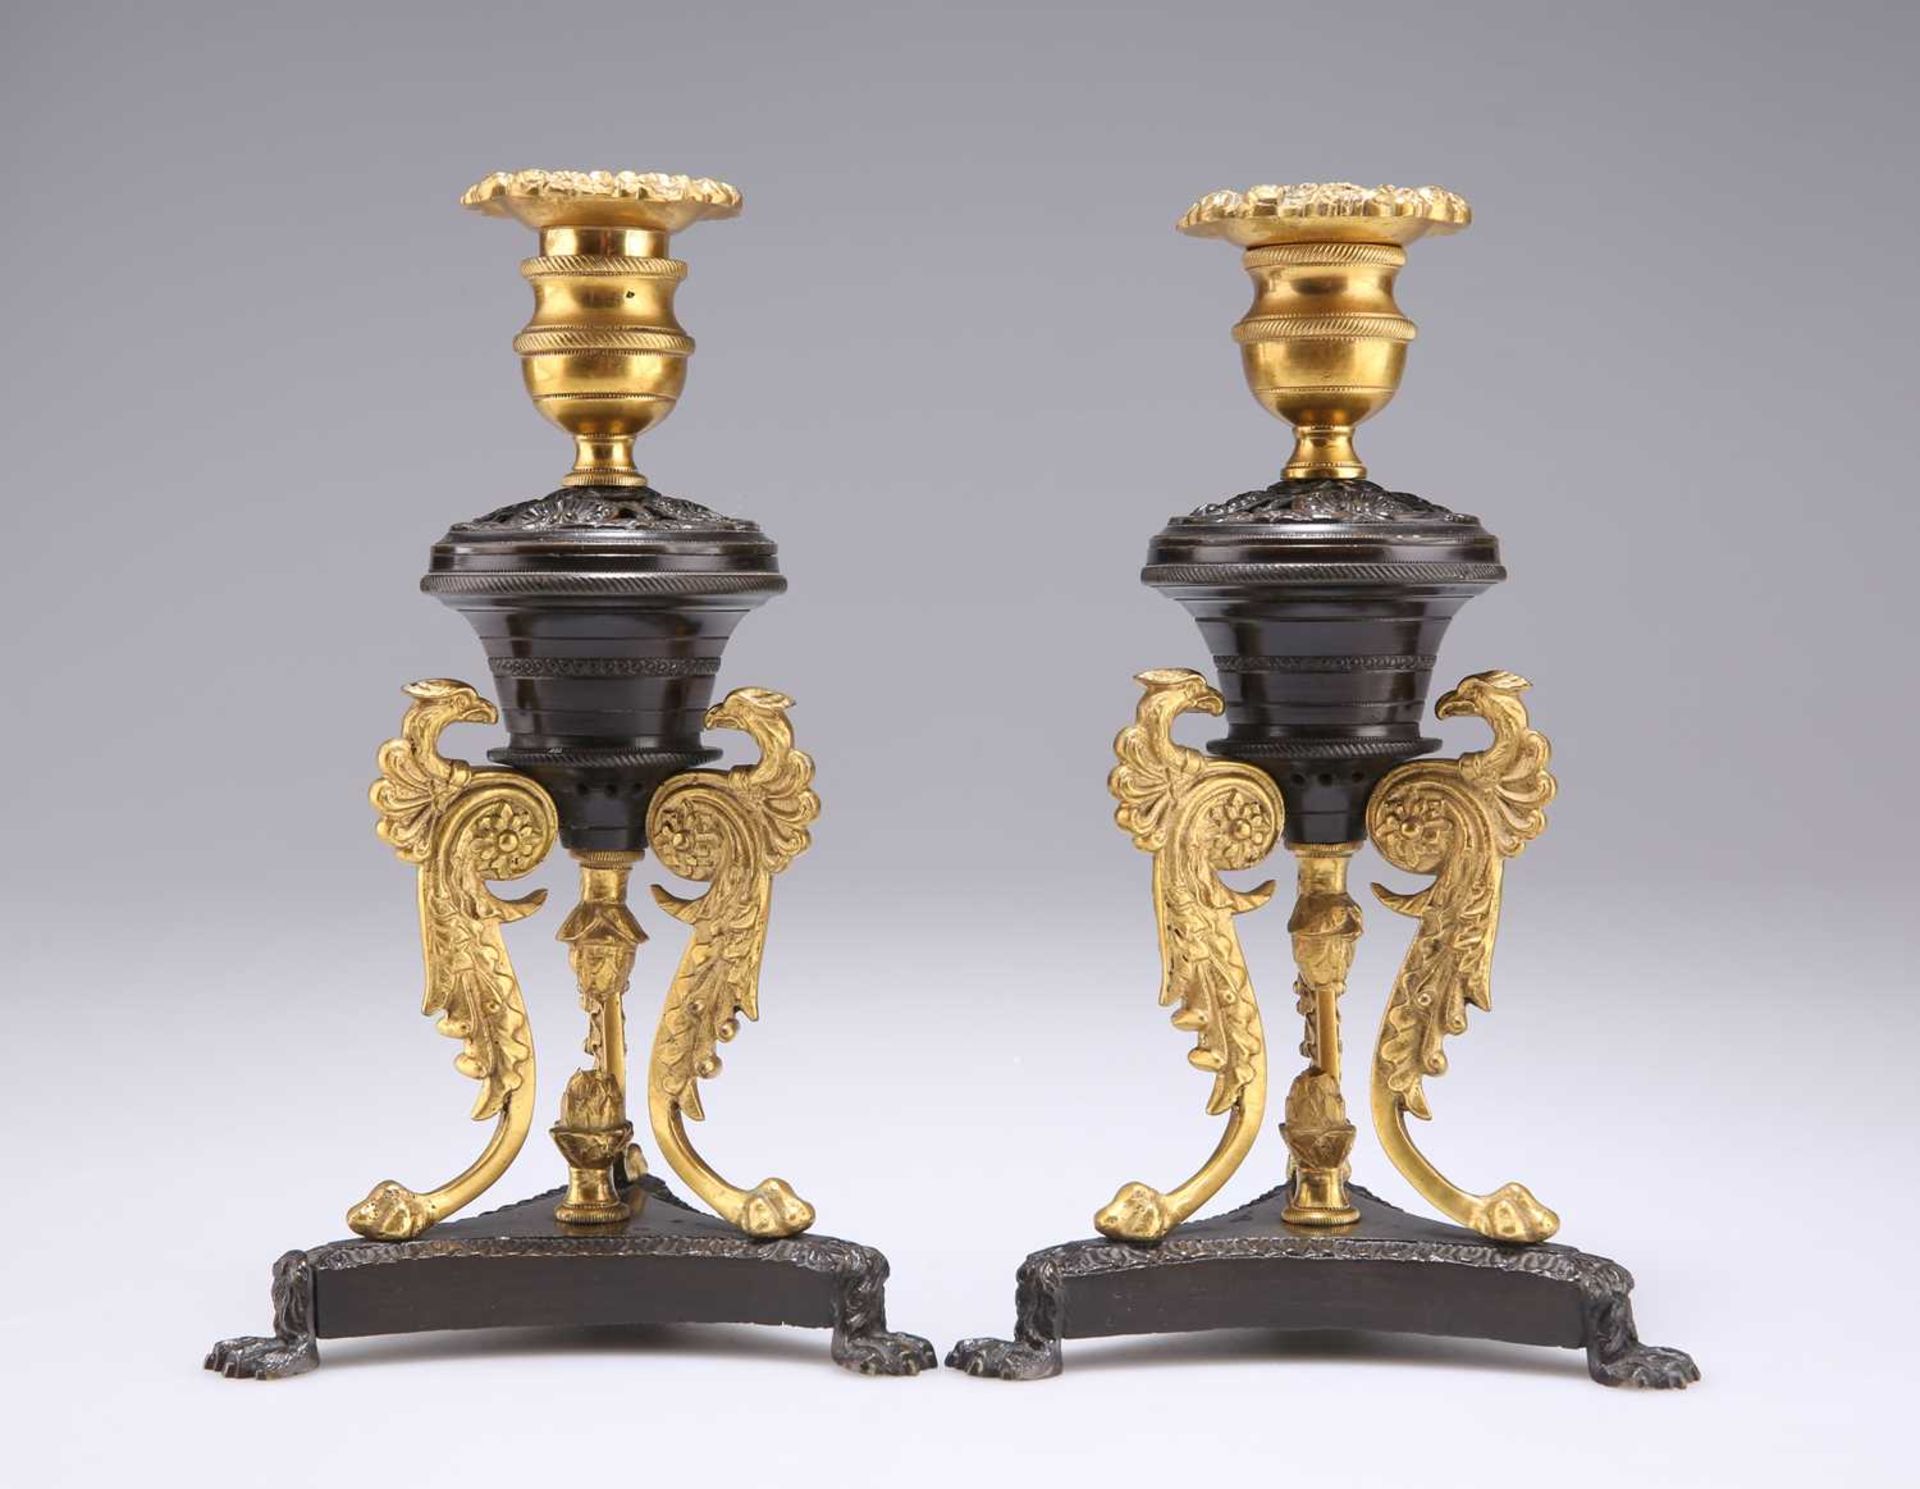 A PAIR OF REGENCY PATINATED AND GILT BRONZE DWARF CANDLESTICKS, IN THE MANNER OF CHENEY, LONDON - Image 2 of 2